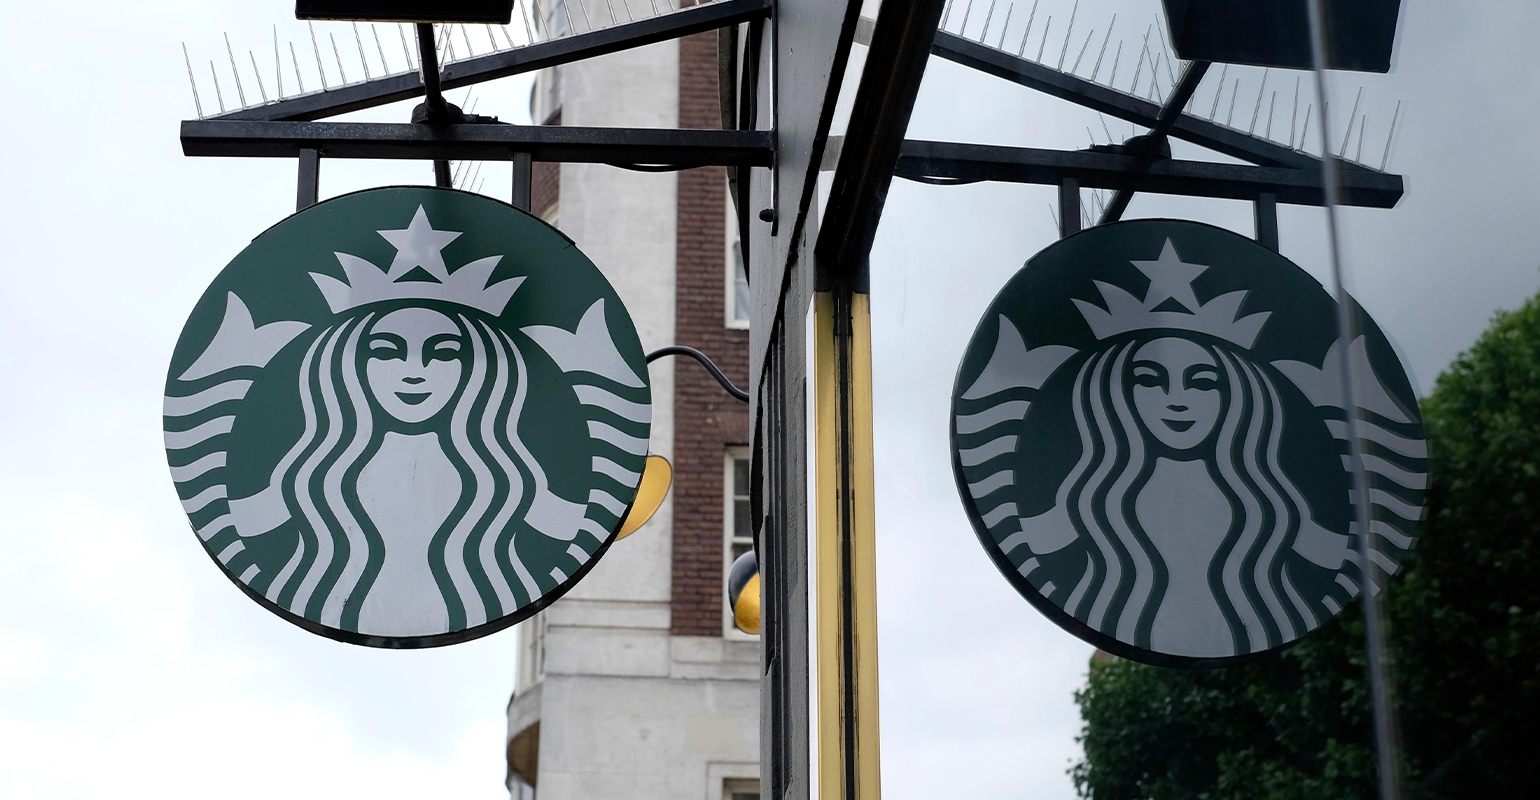 Starbucks announces test of recyclable, compostable cups